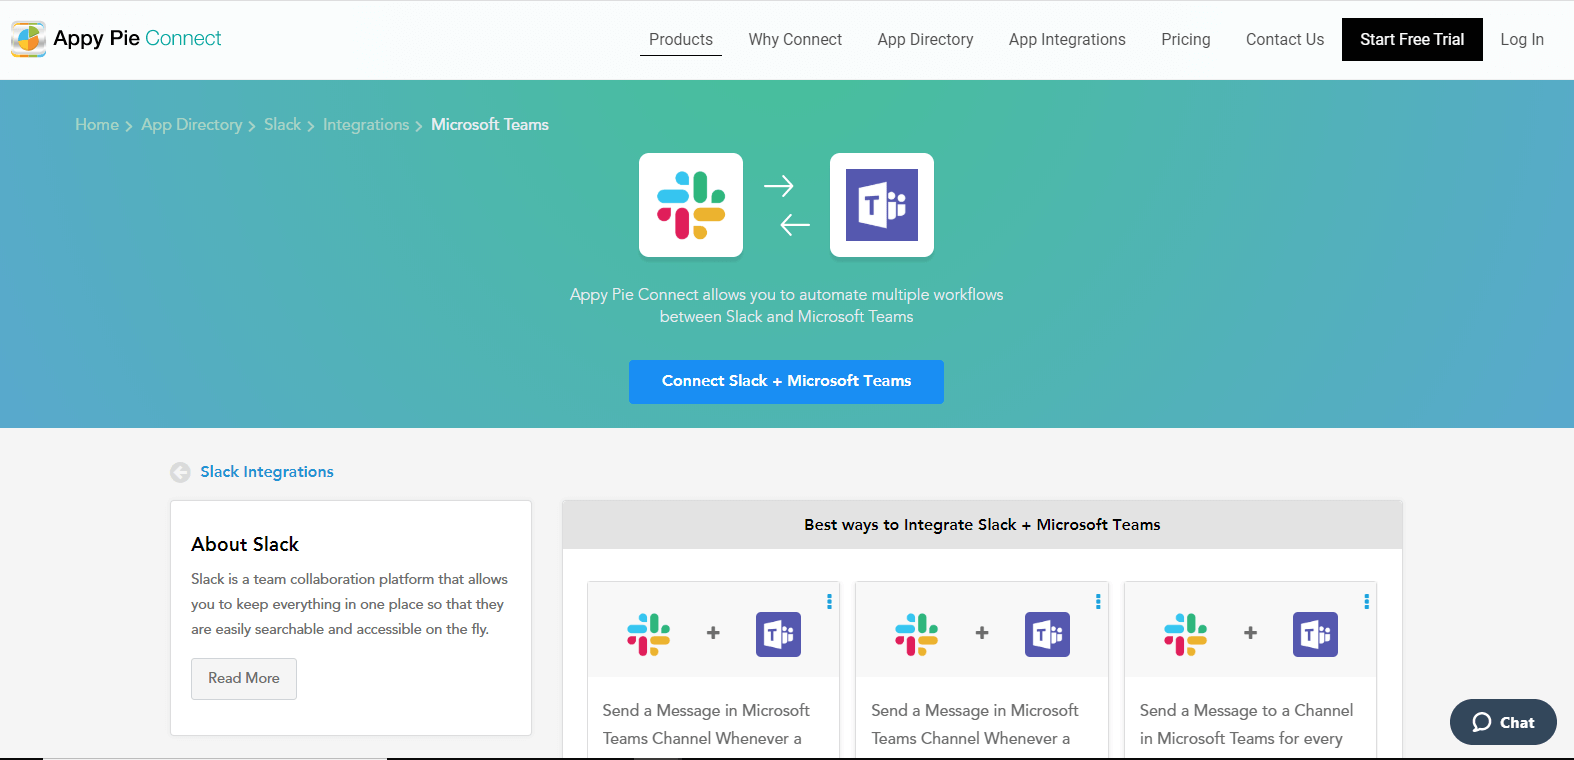 Integrate Connect slack and microsoft teams using Appy Pie